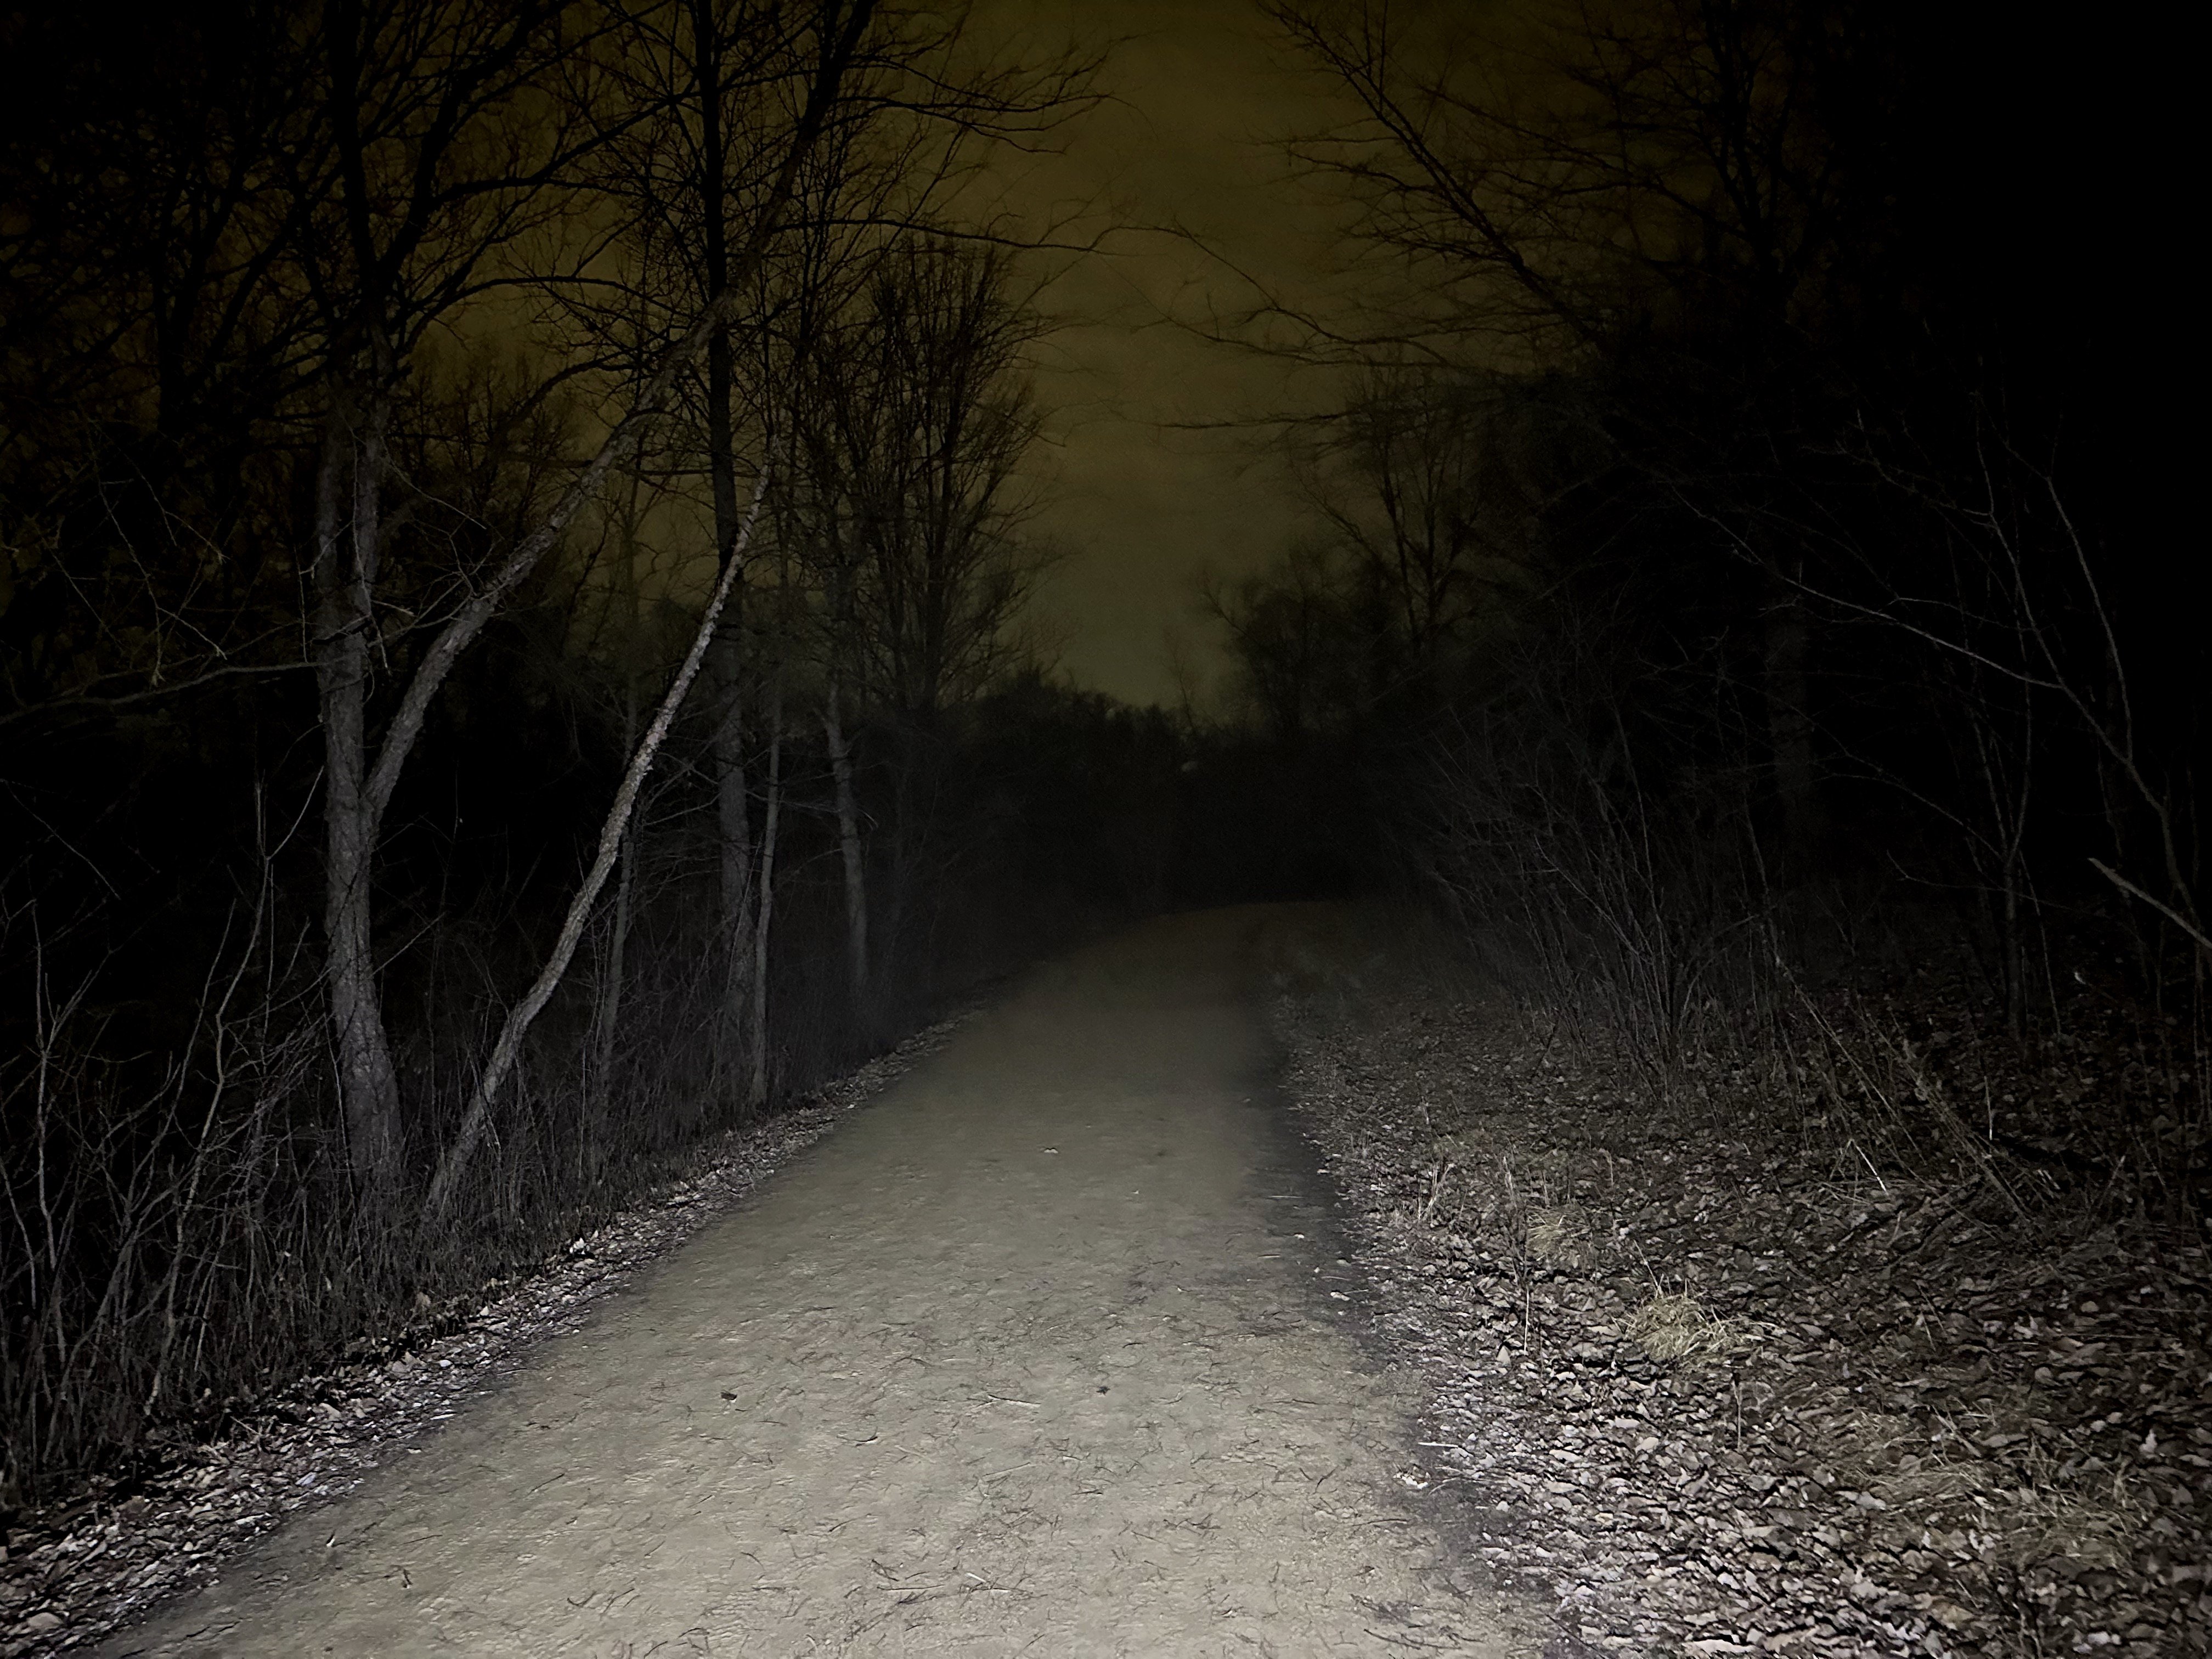 A dimly lit dirt path leads through a dense, dark forest at night, creating a moody and mysterious atmosphere